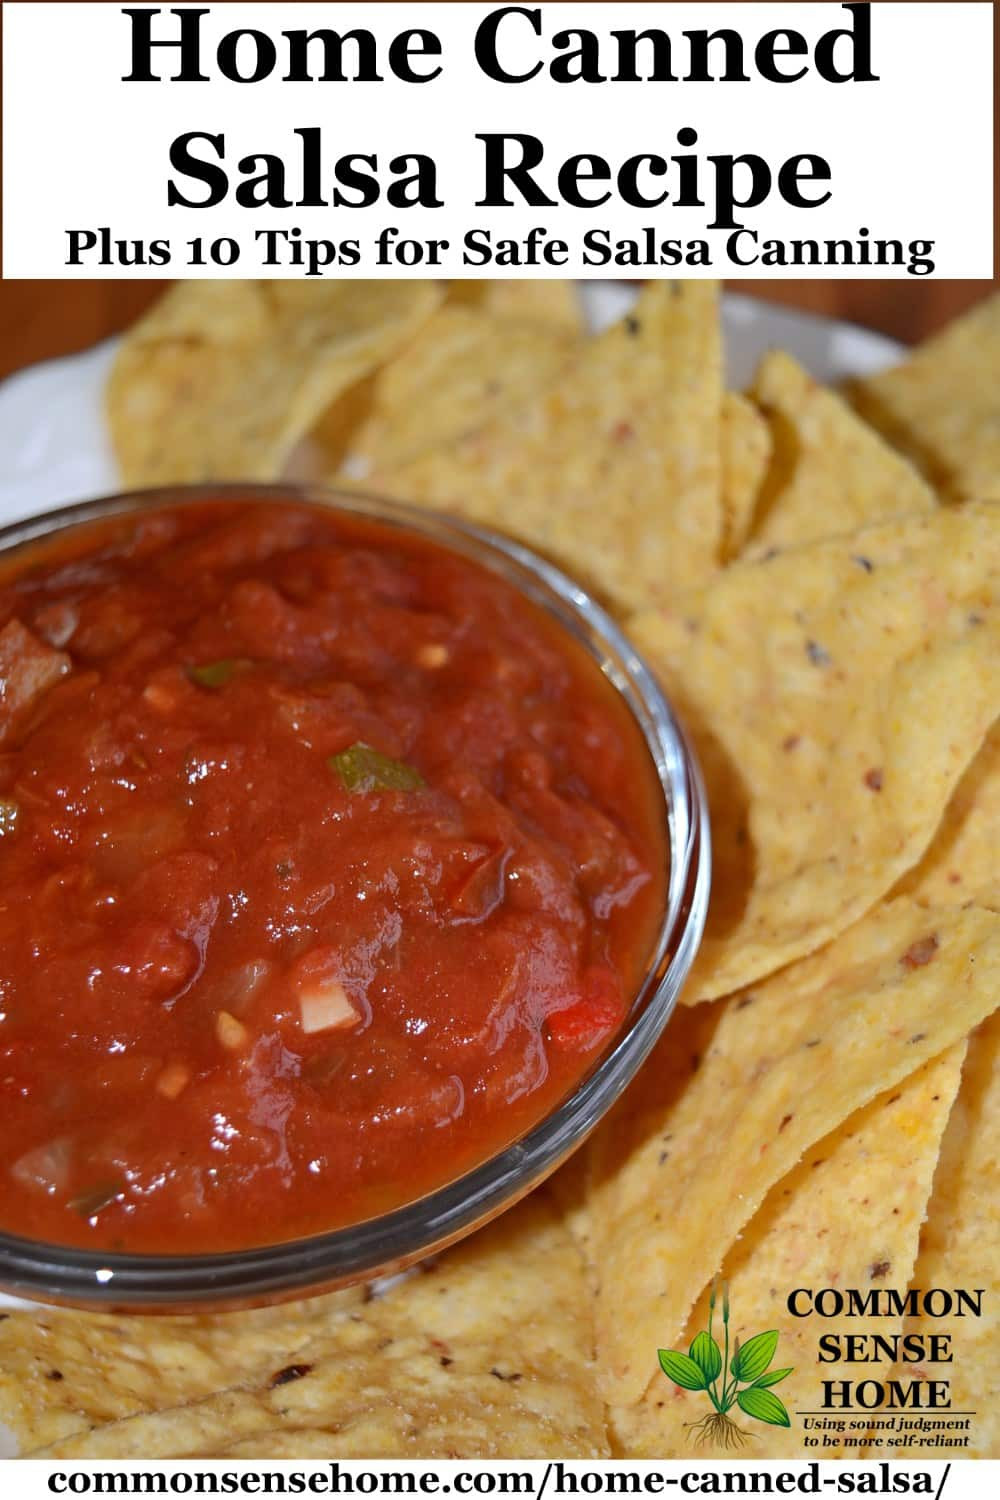 Salsa Recipe For Canning
 Home Canned Salsa Recipe Plus 10 Tips for Canning Salsa